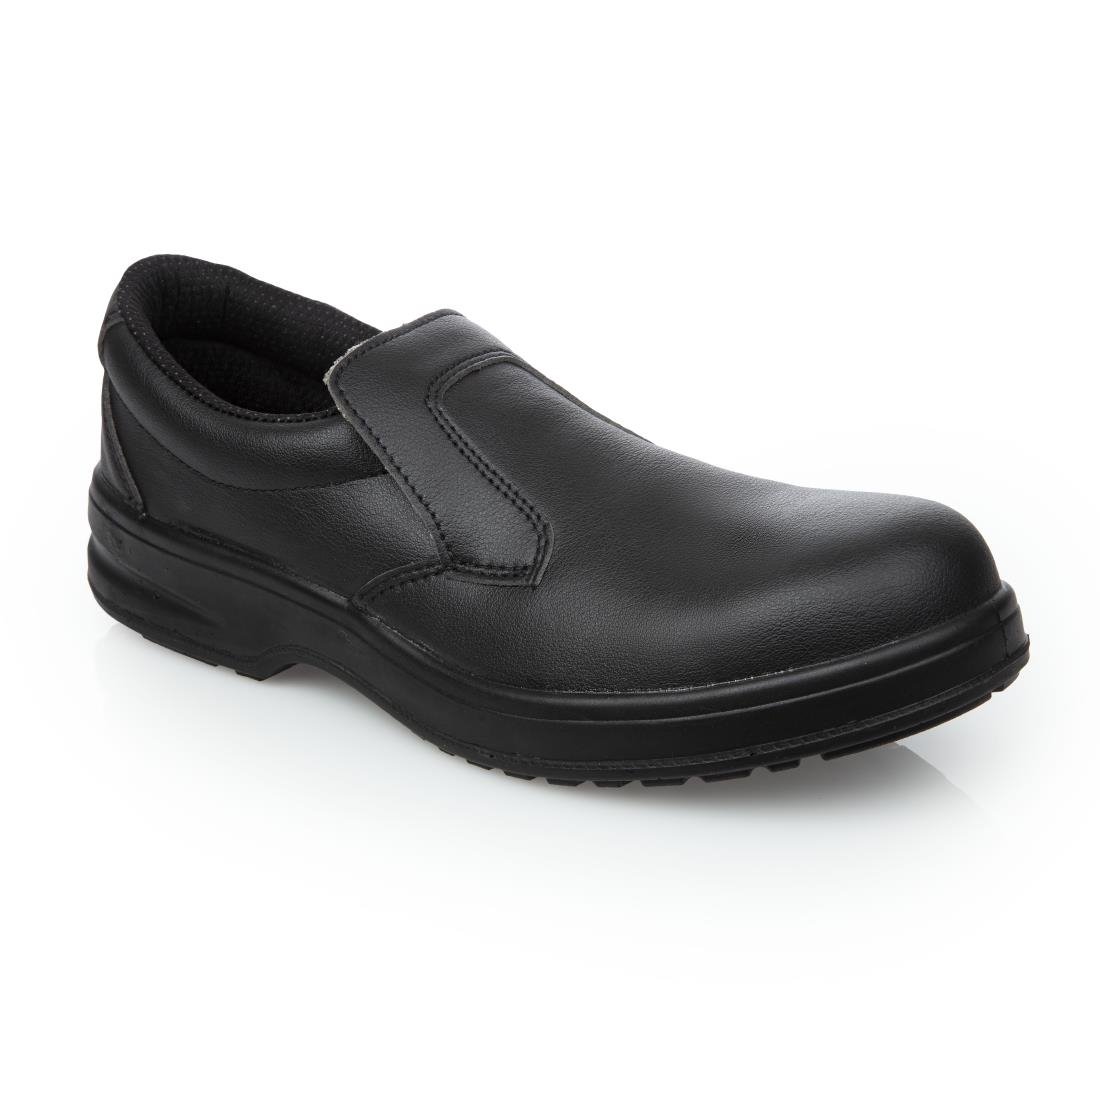 A845-38 Slipbuster Lite Slip On Safety Shoes Black 38 JD Catering Equipment Solutions Ltd